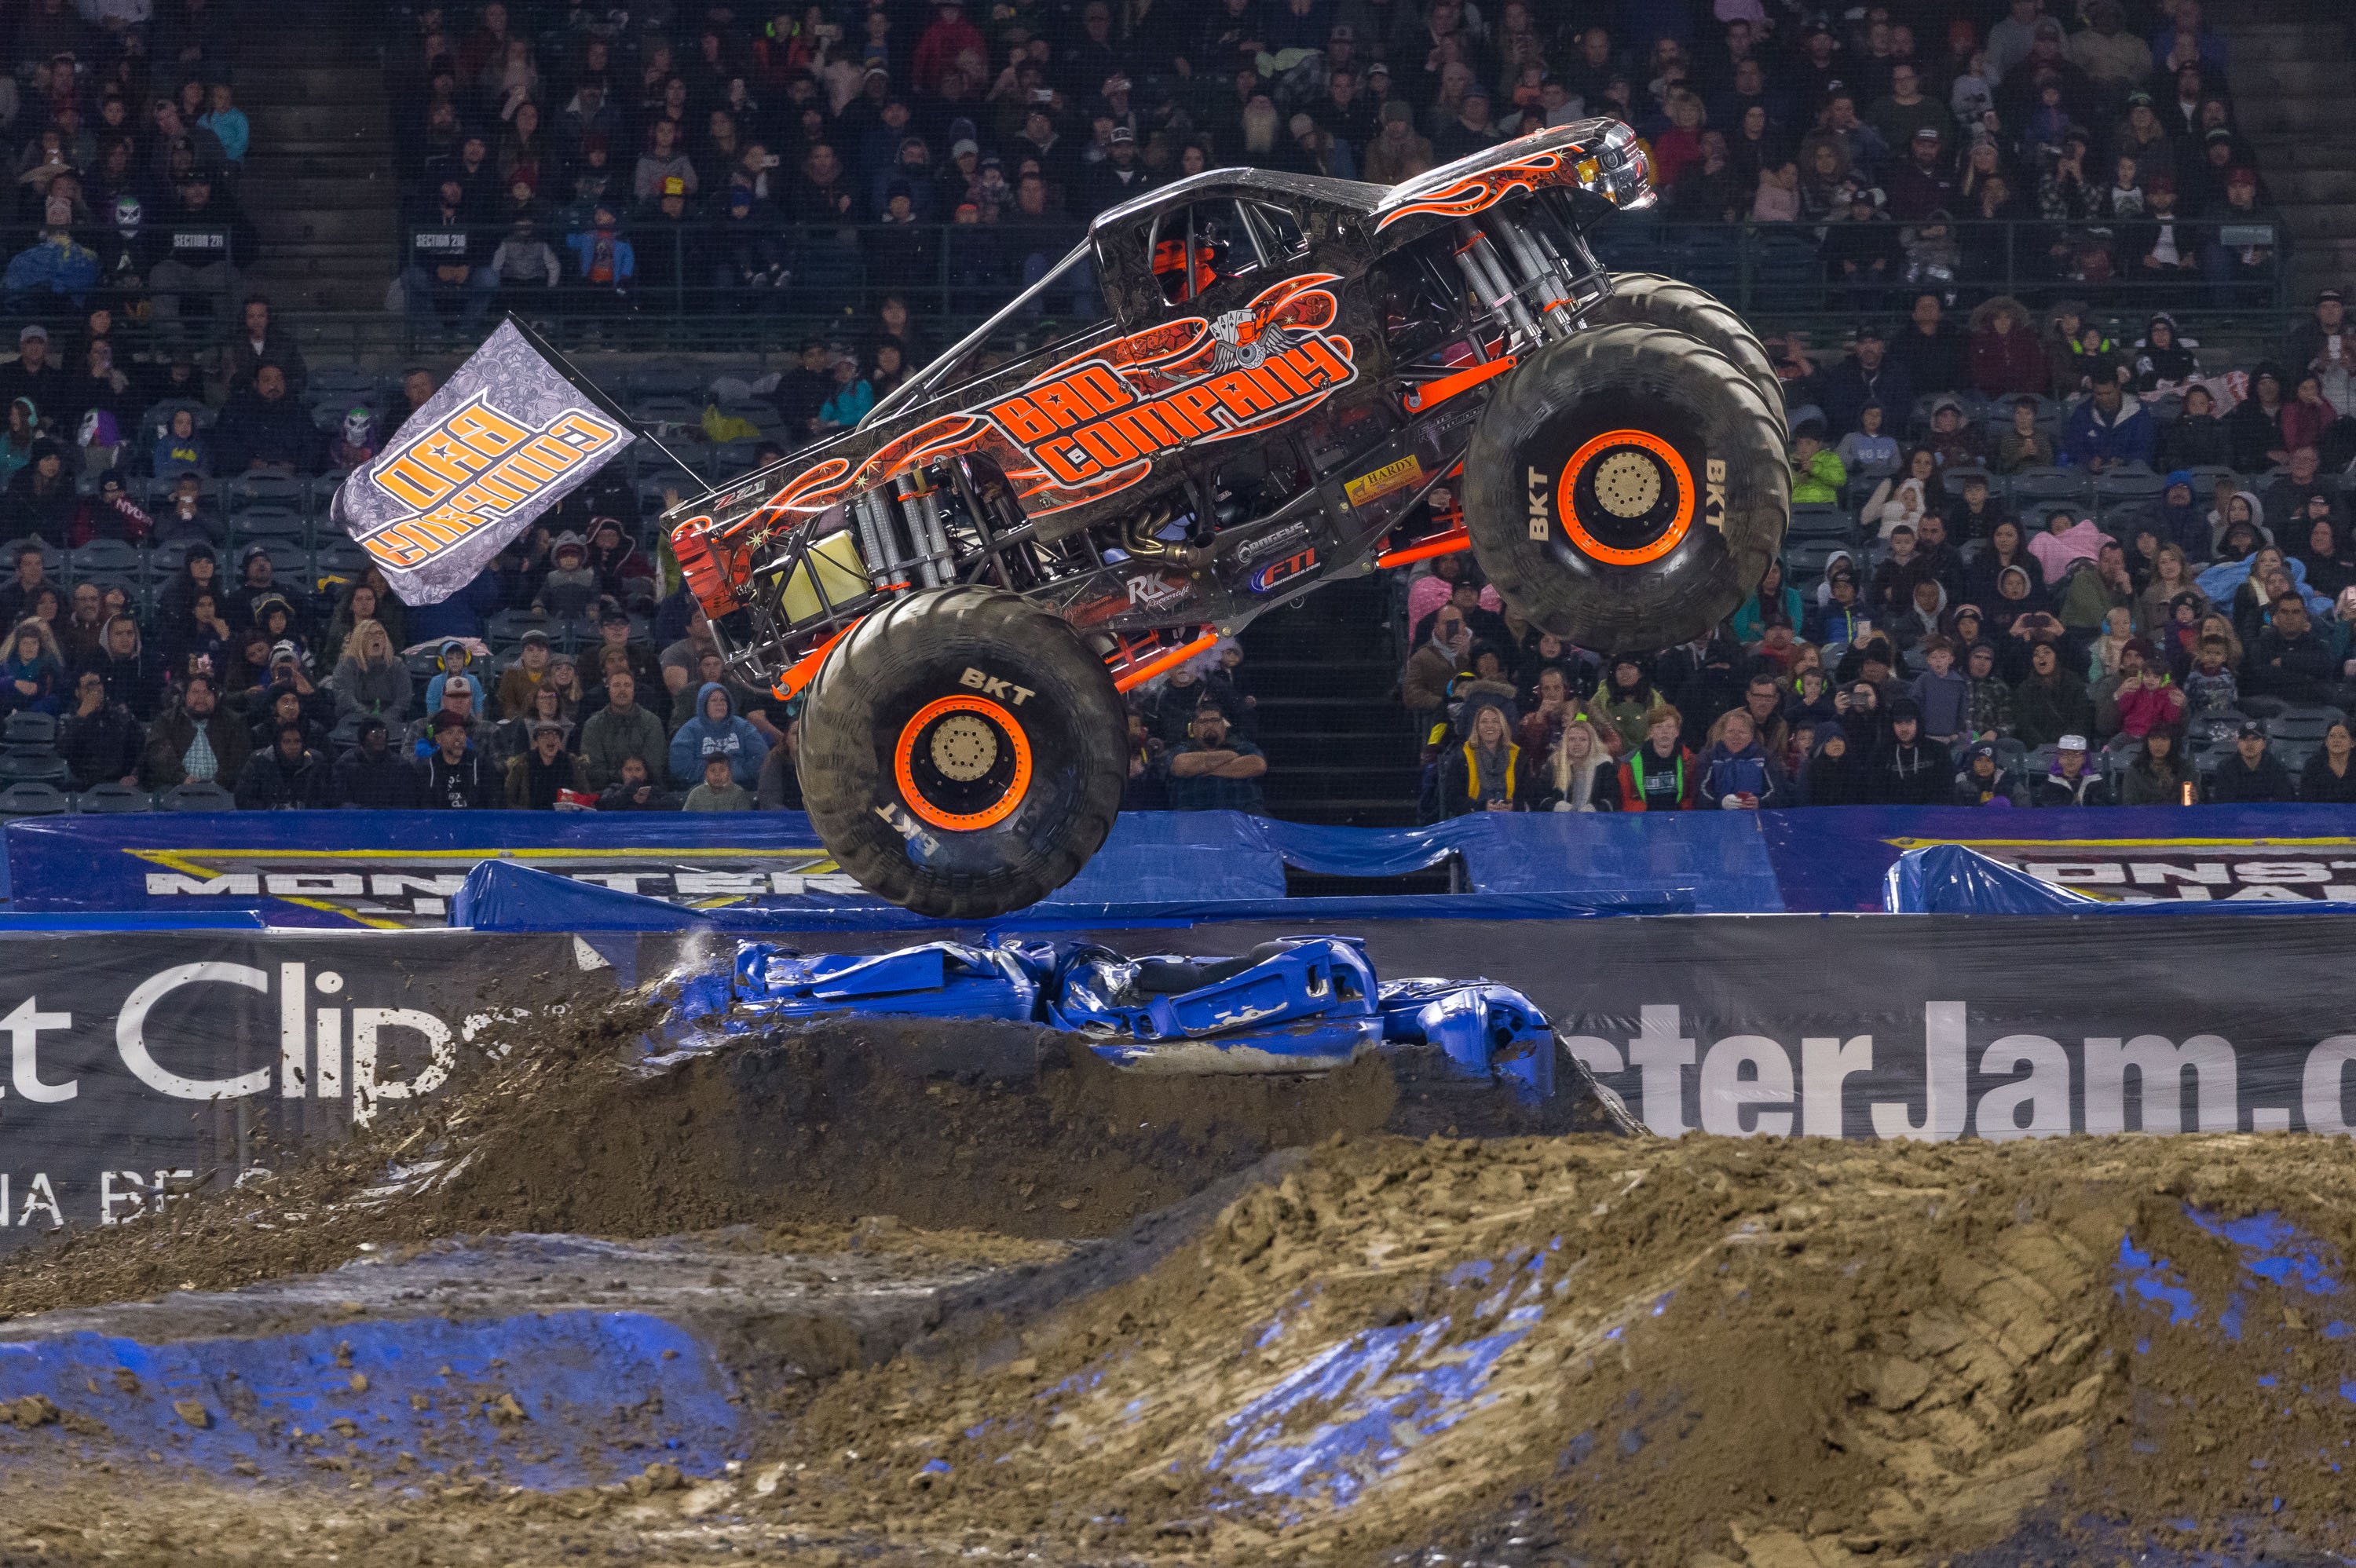 MONSTER JAM® ROARS BACK INTO LOS ANGELES THIS SUMMER WITH ACTION